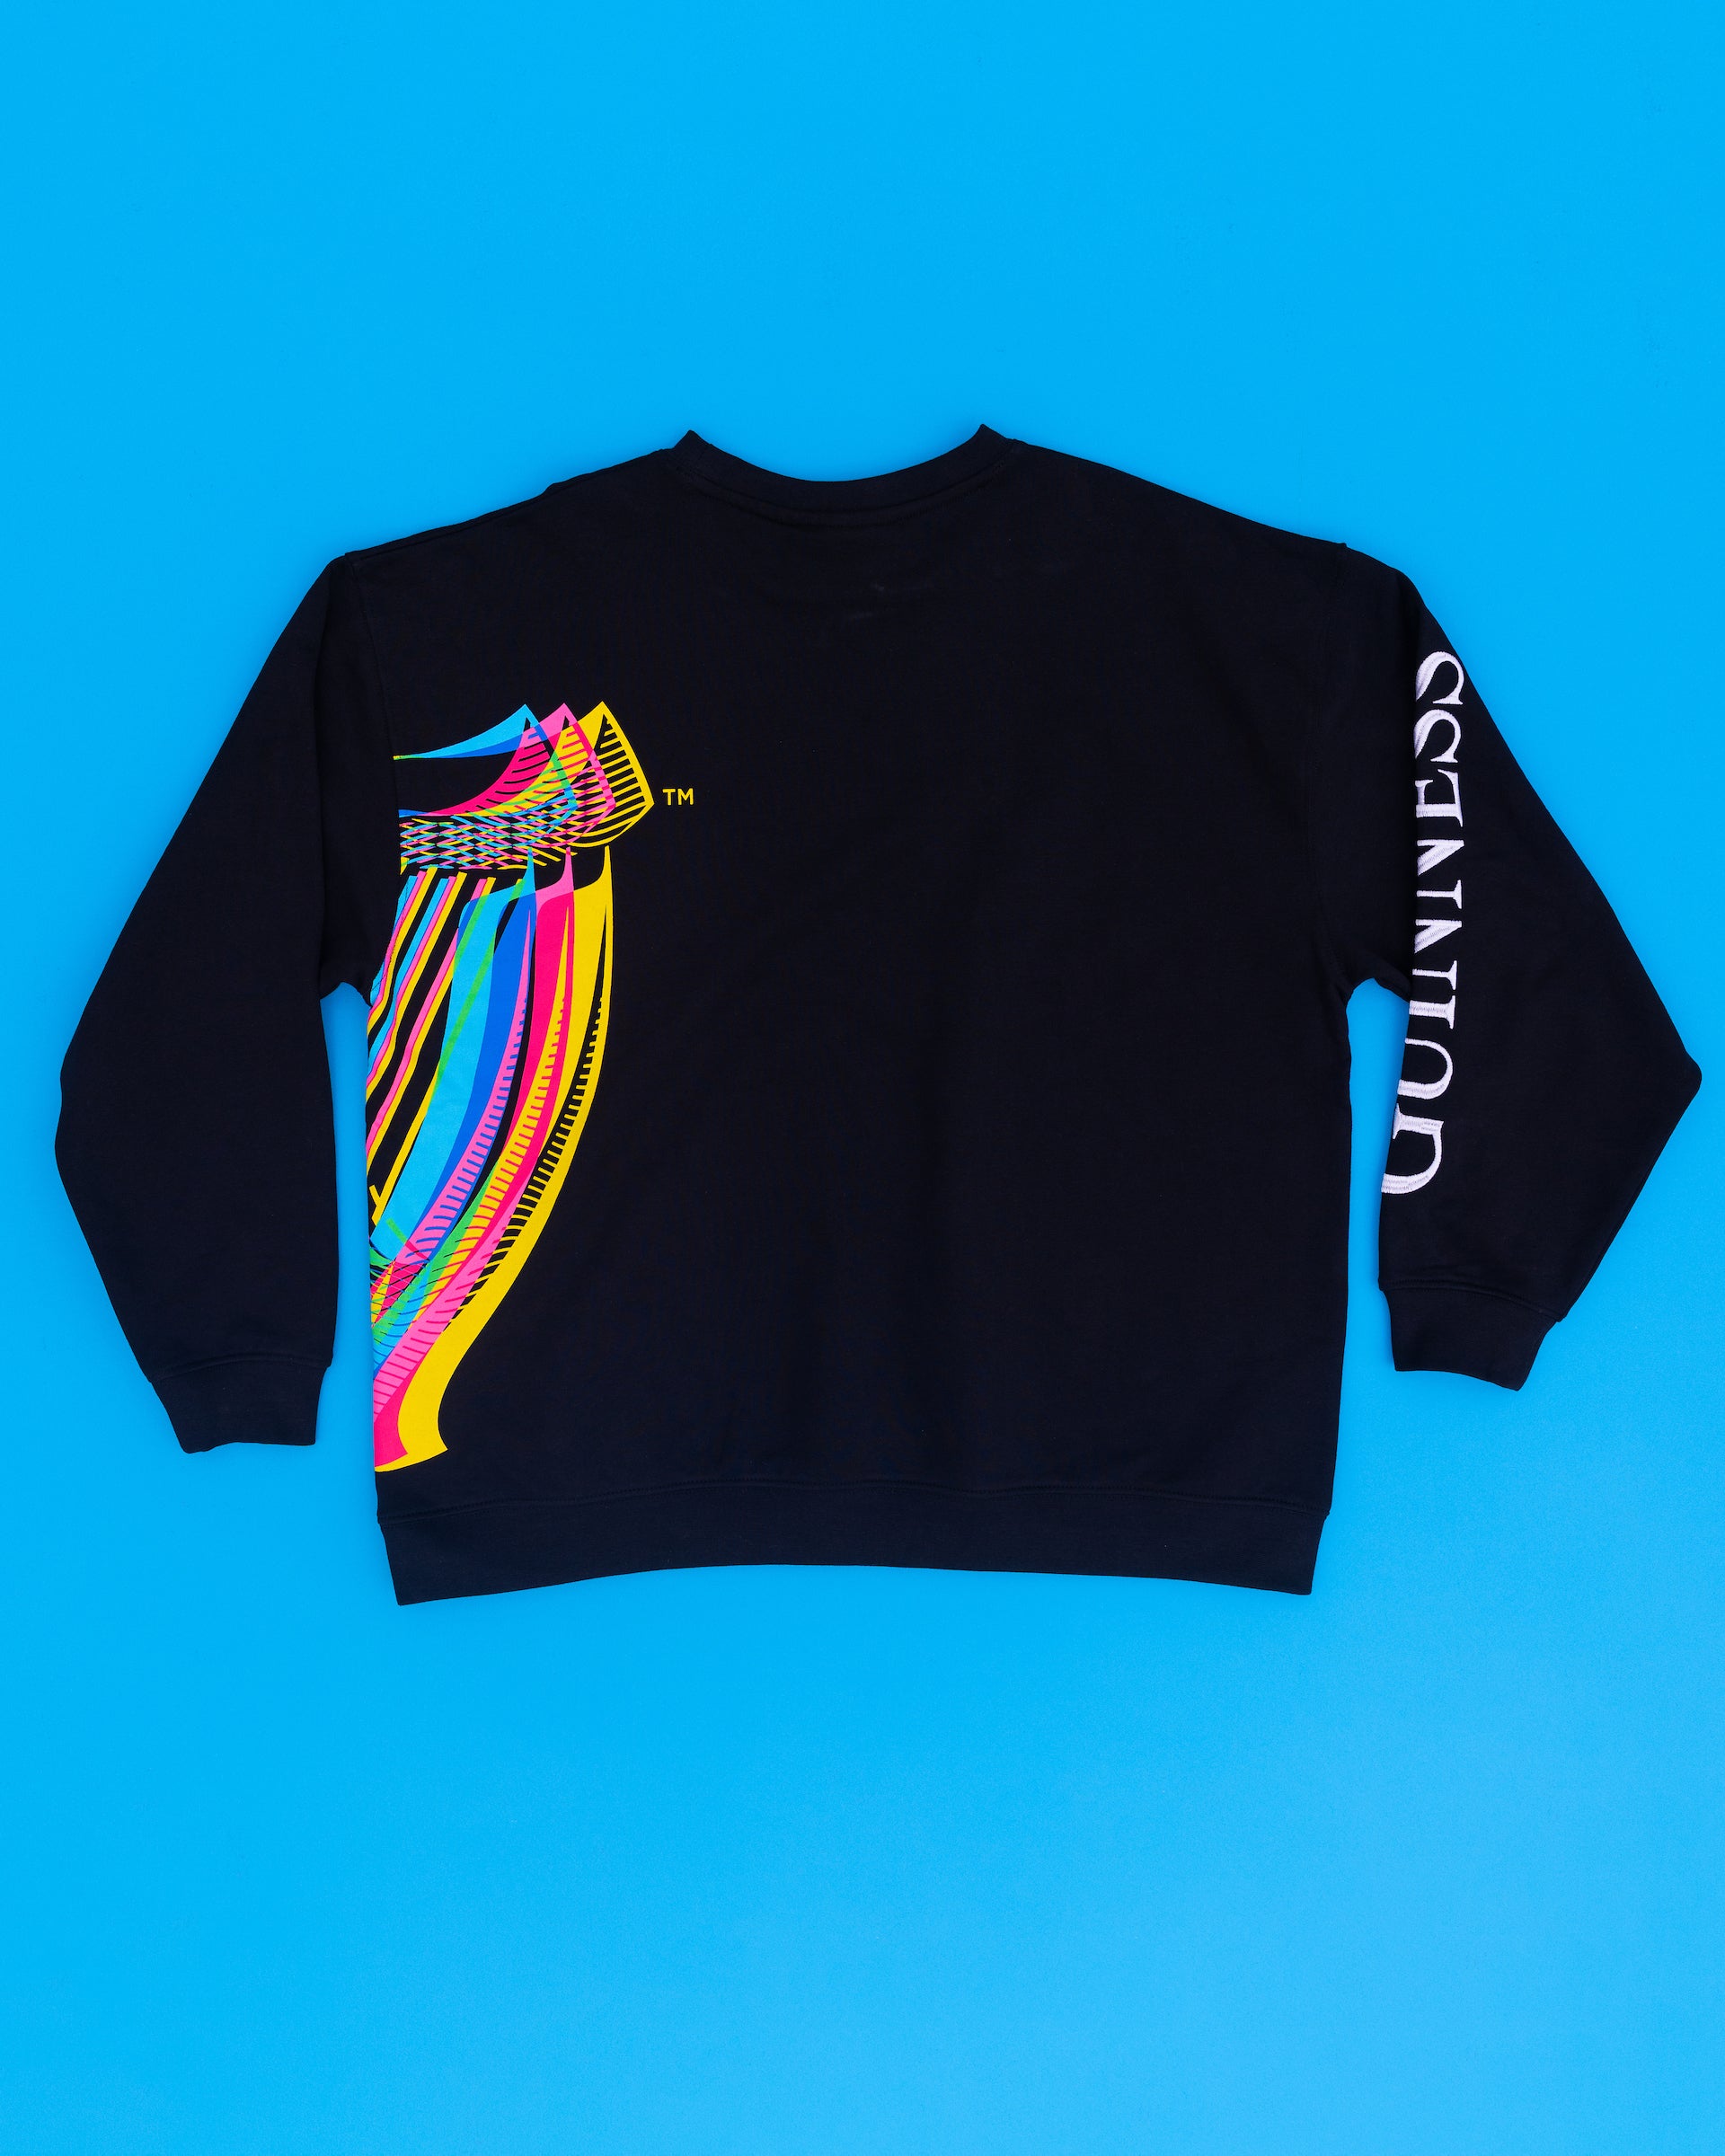 Back or the black Sweatshirt designed by the Irish graffiti artist, Aches for Guinness Storehouse Exclusive. 100% organic cotton with quality print Guinness harp